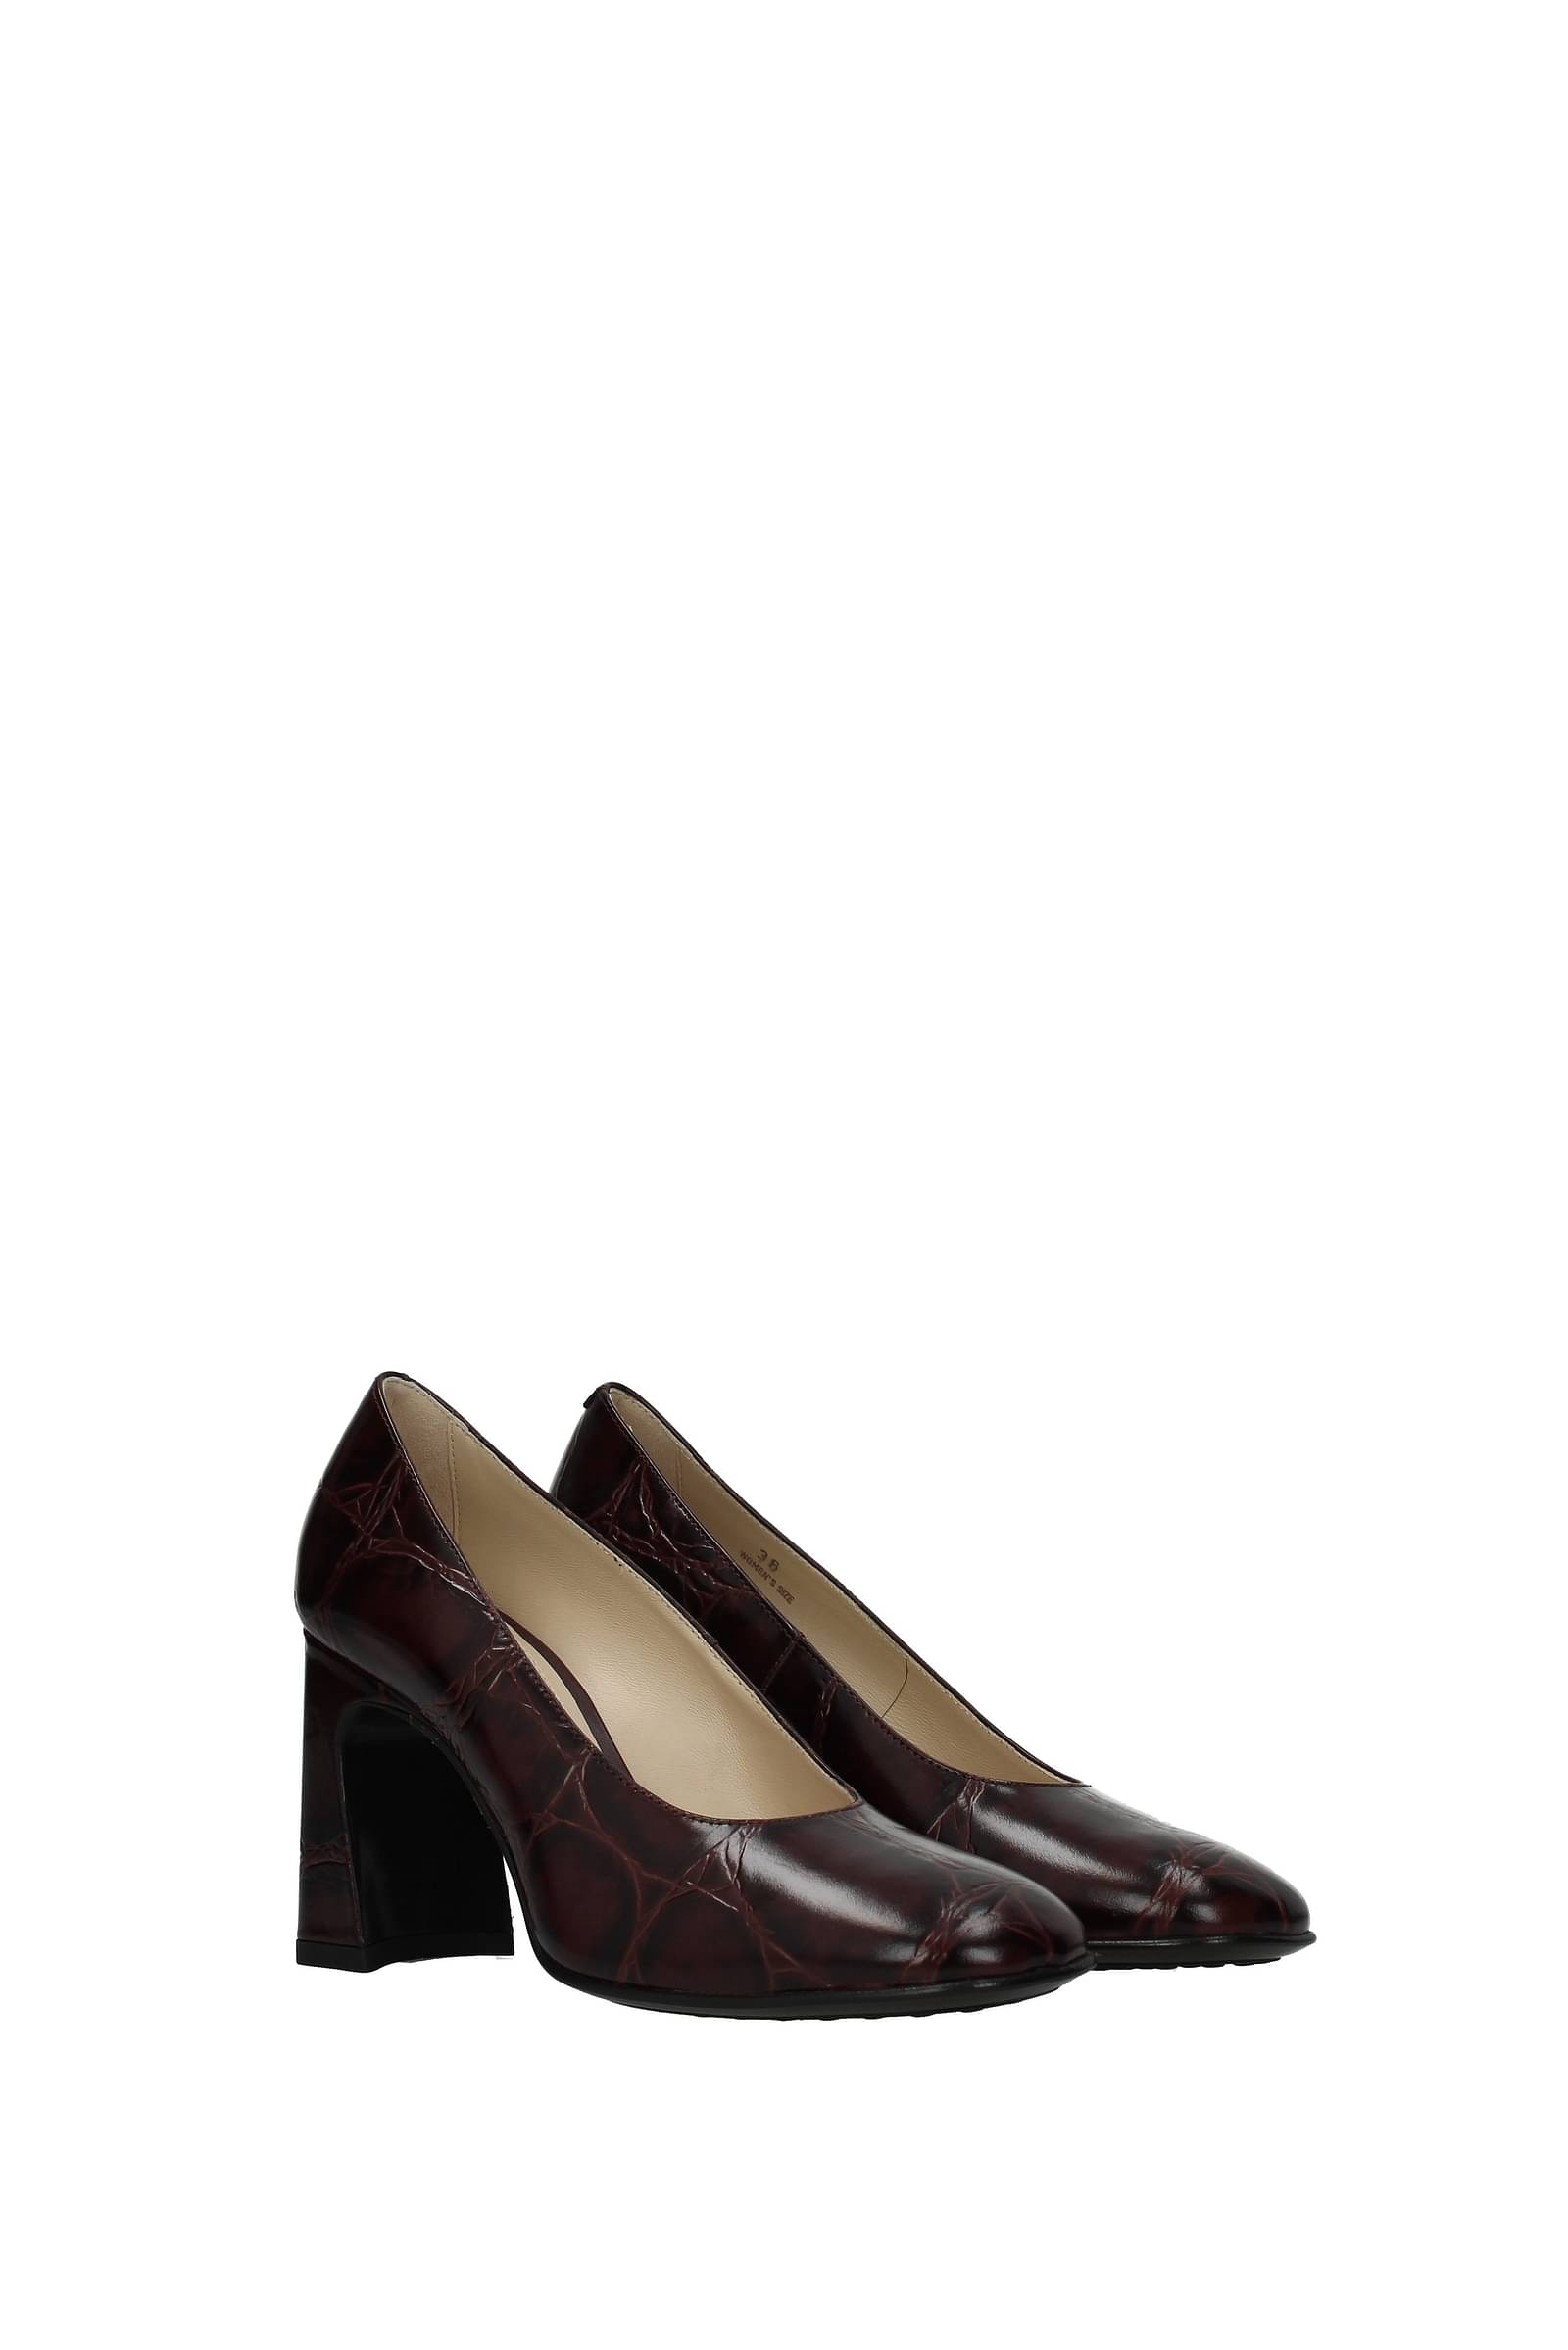 Tod's Pumps Women Leather Red Wine